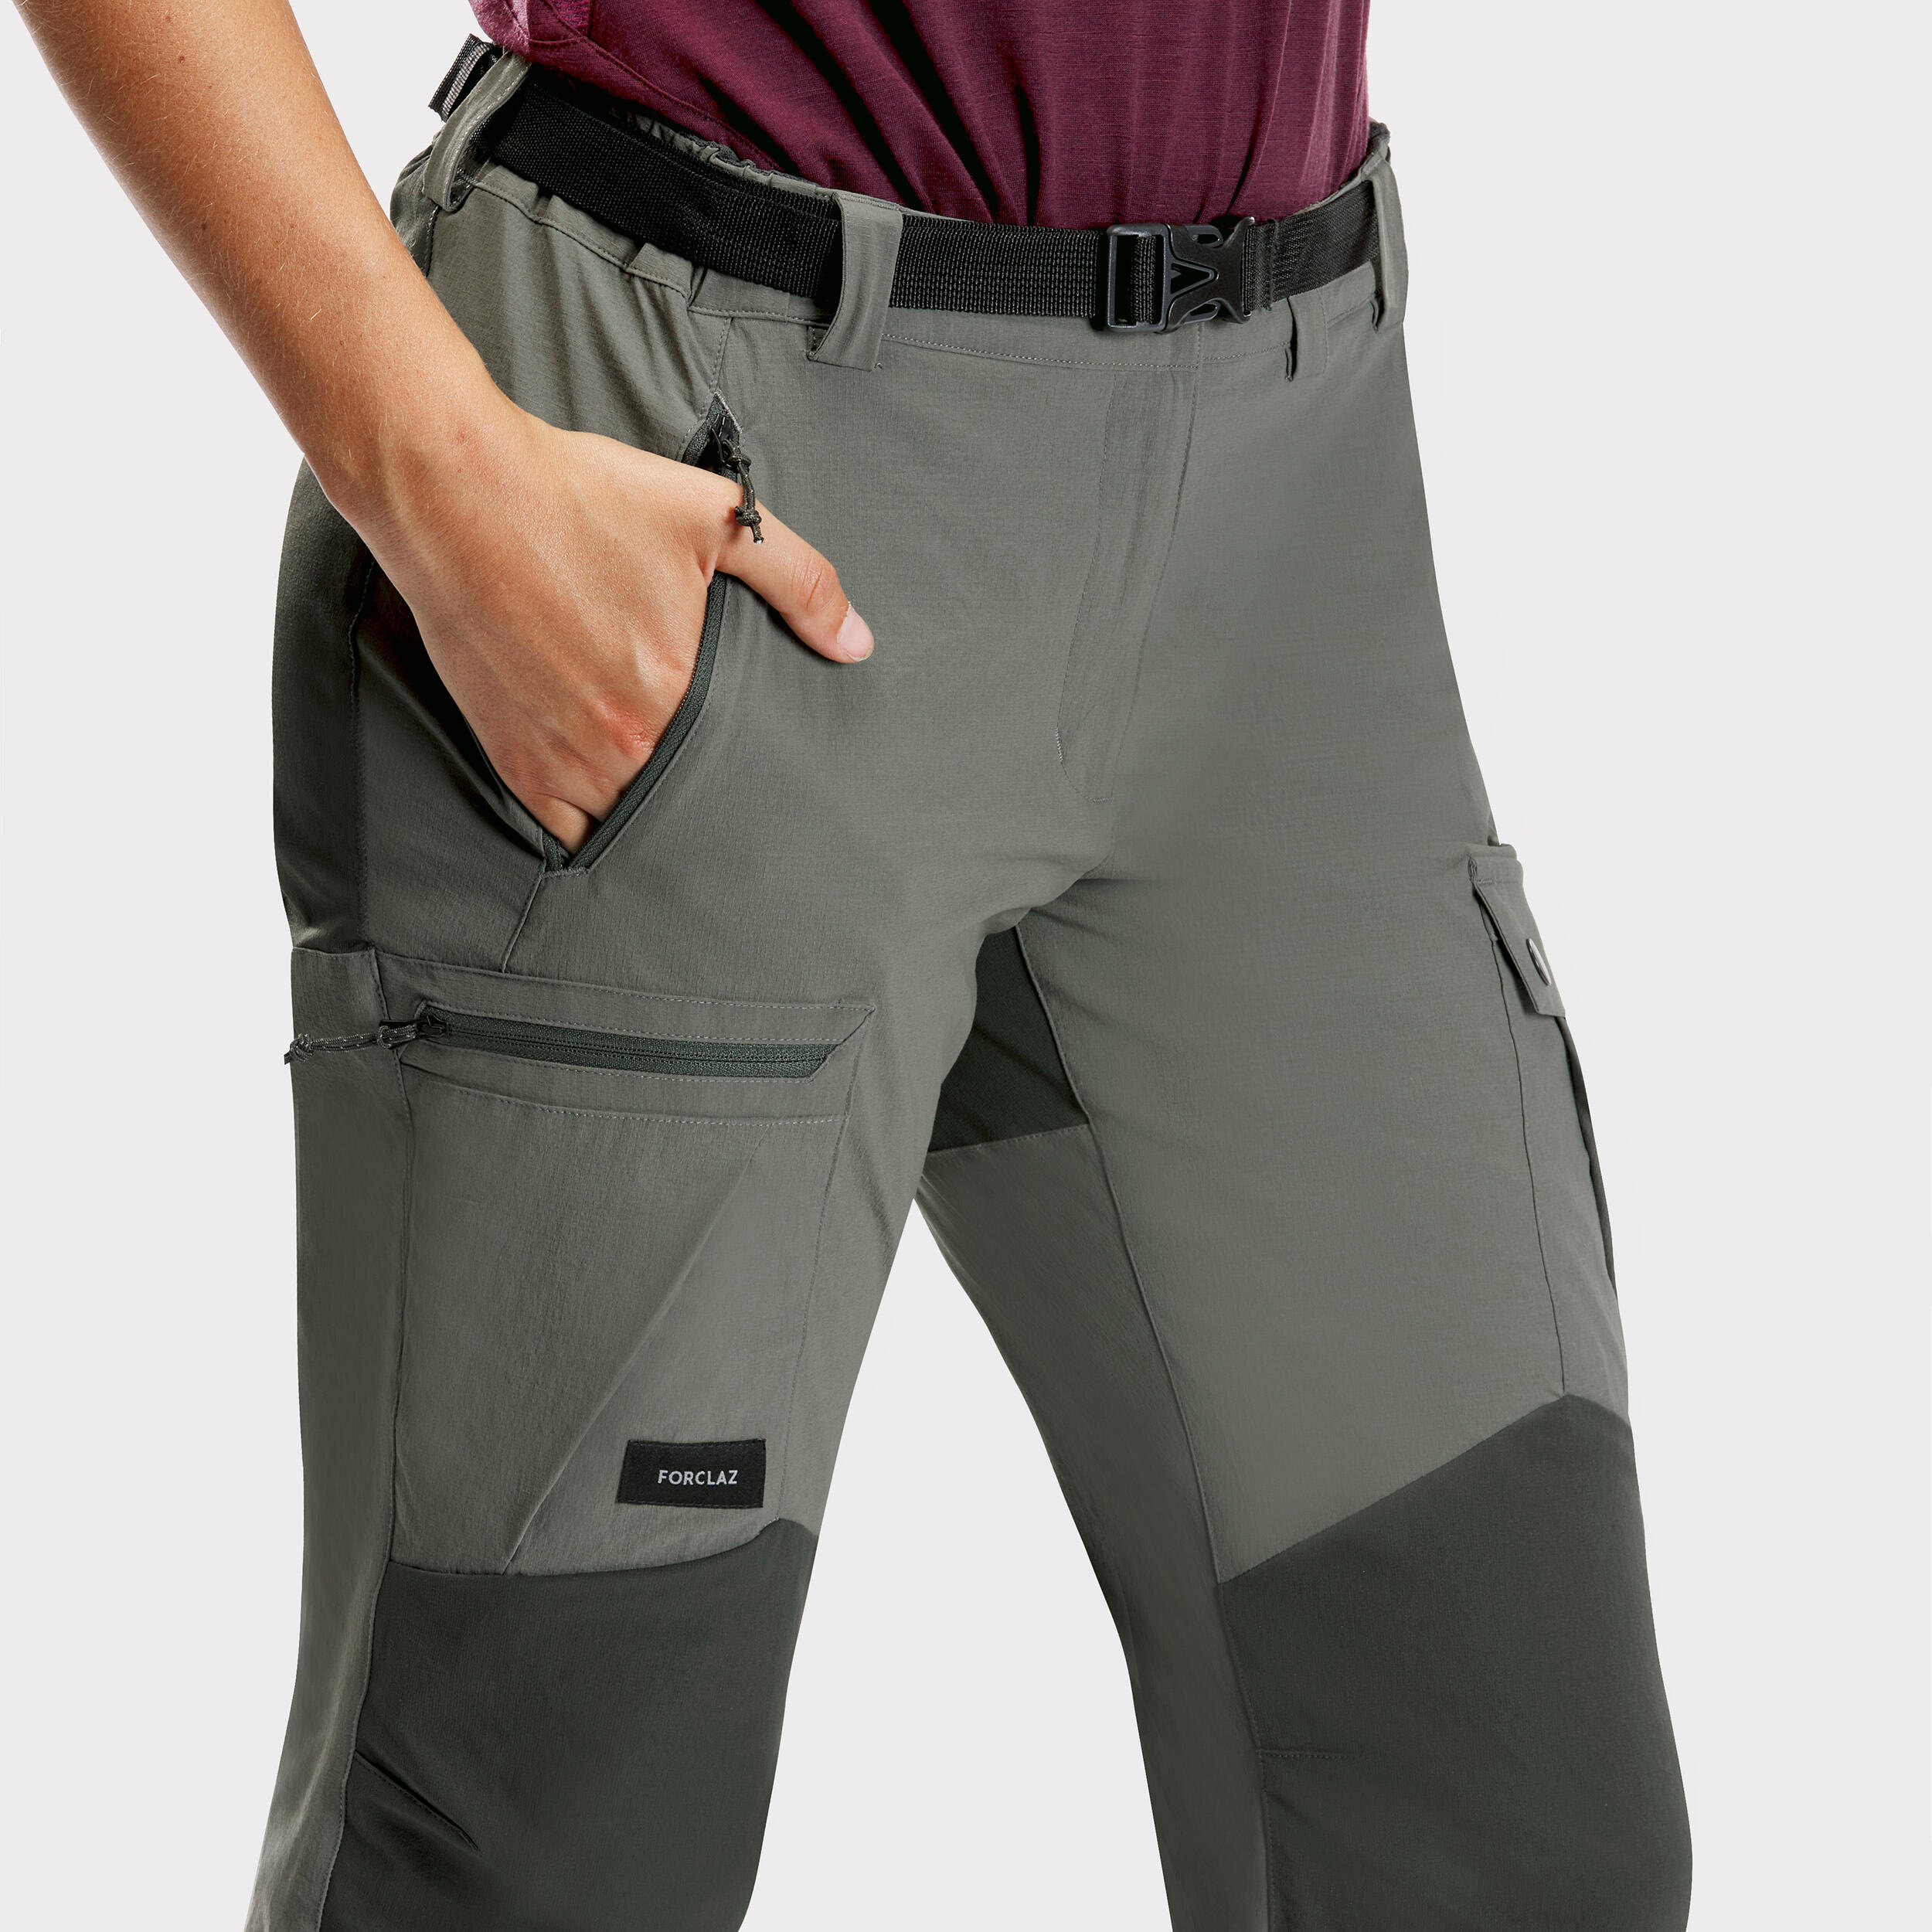 DECATHLON FORCLAZ Mens Mountain Trekking Durable 2in1 ZipOff Trousers  MT100  Unboxing  Review  YouTube